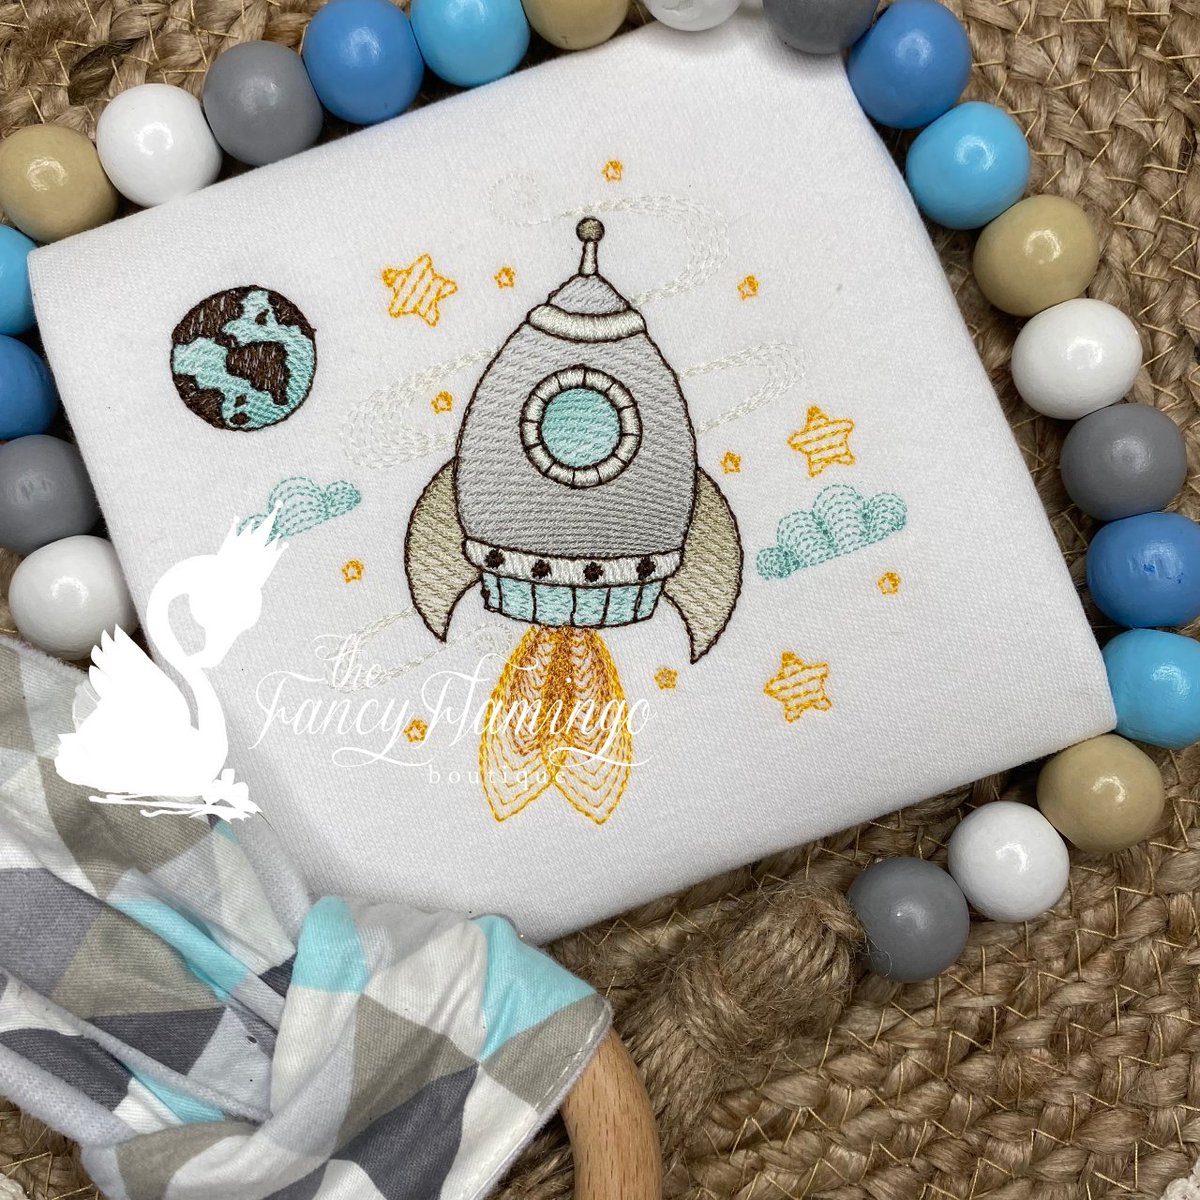 This adorable baby attire features a charming design of a rocket ship soaring through space, surrounded by twinkling stars and a whimsical planet. #rocketship #spaceship #celestialbaby #babyshower #babyfashion #babyshowergiftidea #showergift